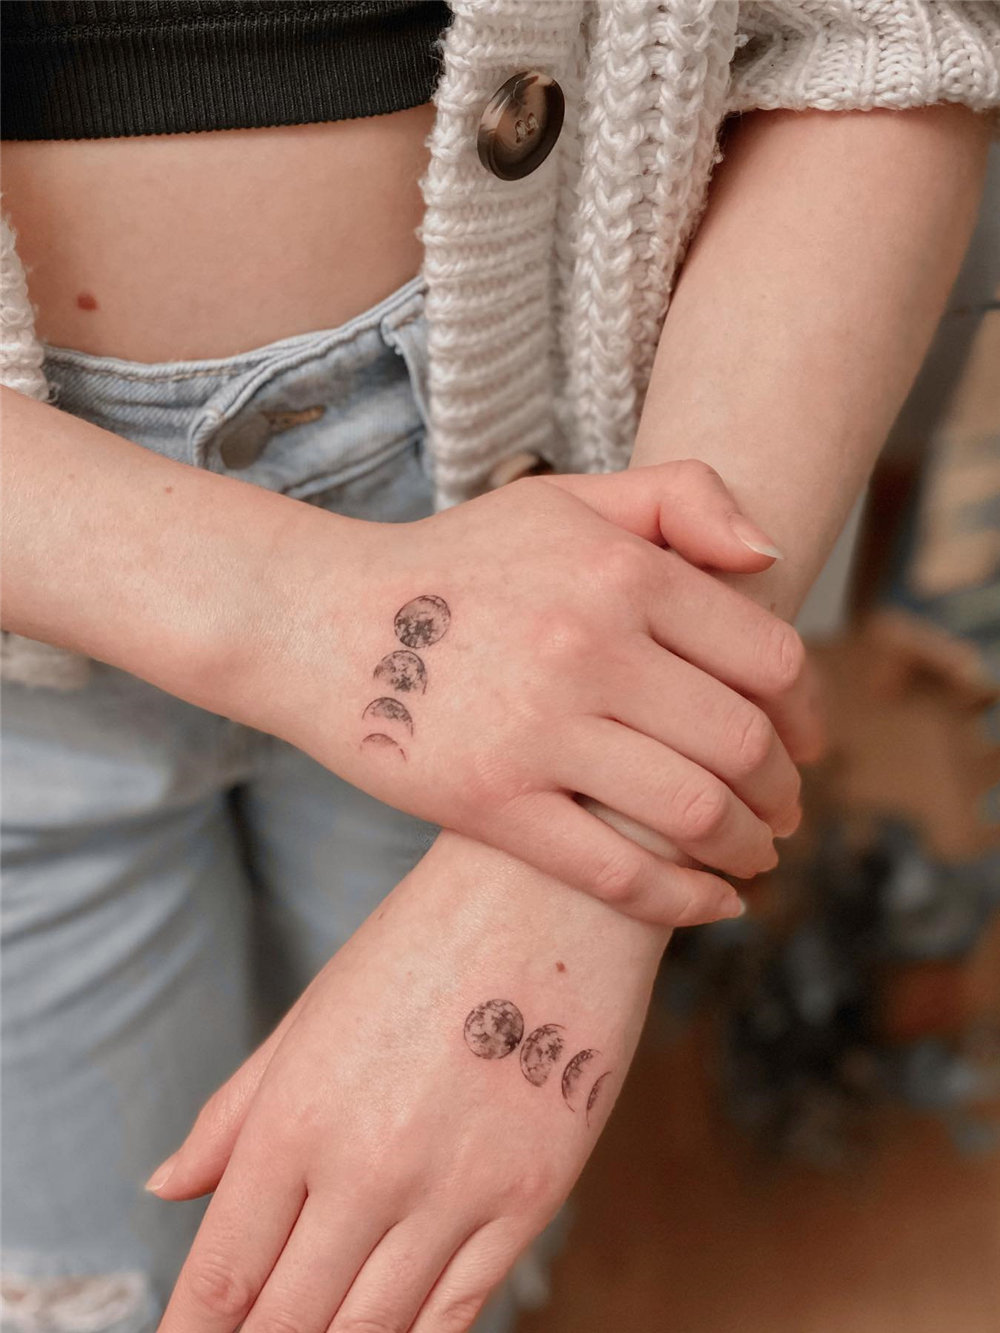 small tattoo for women, small tattoos with meaning, simple small tattoos for women, cute small tattoo ideas, #smalltattoos simpletattoos #tattoosforwomen